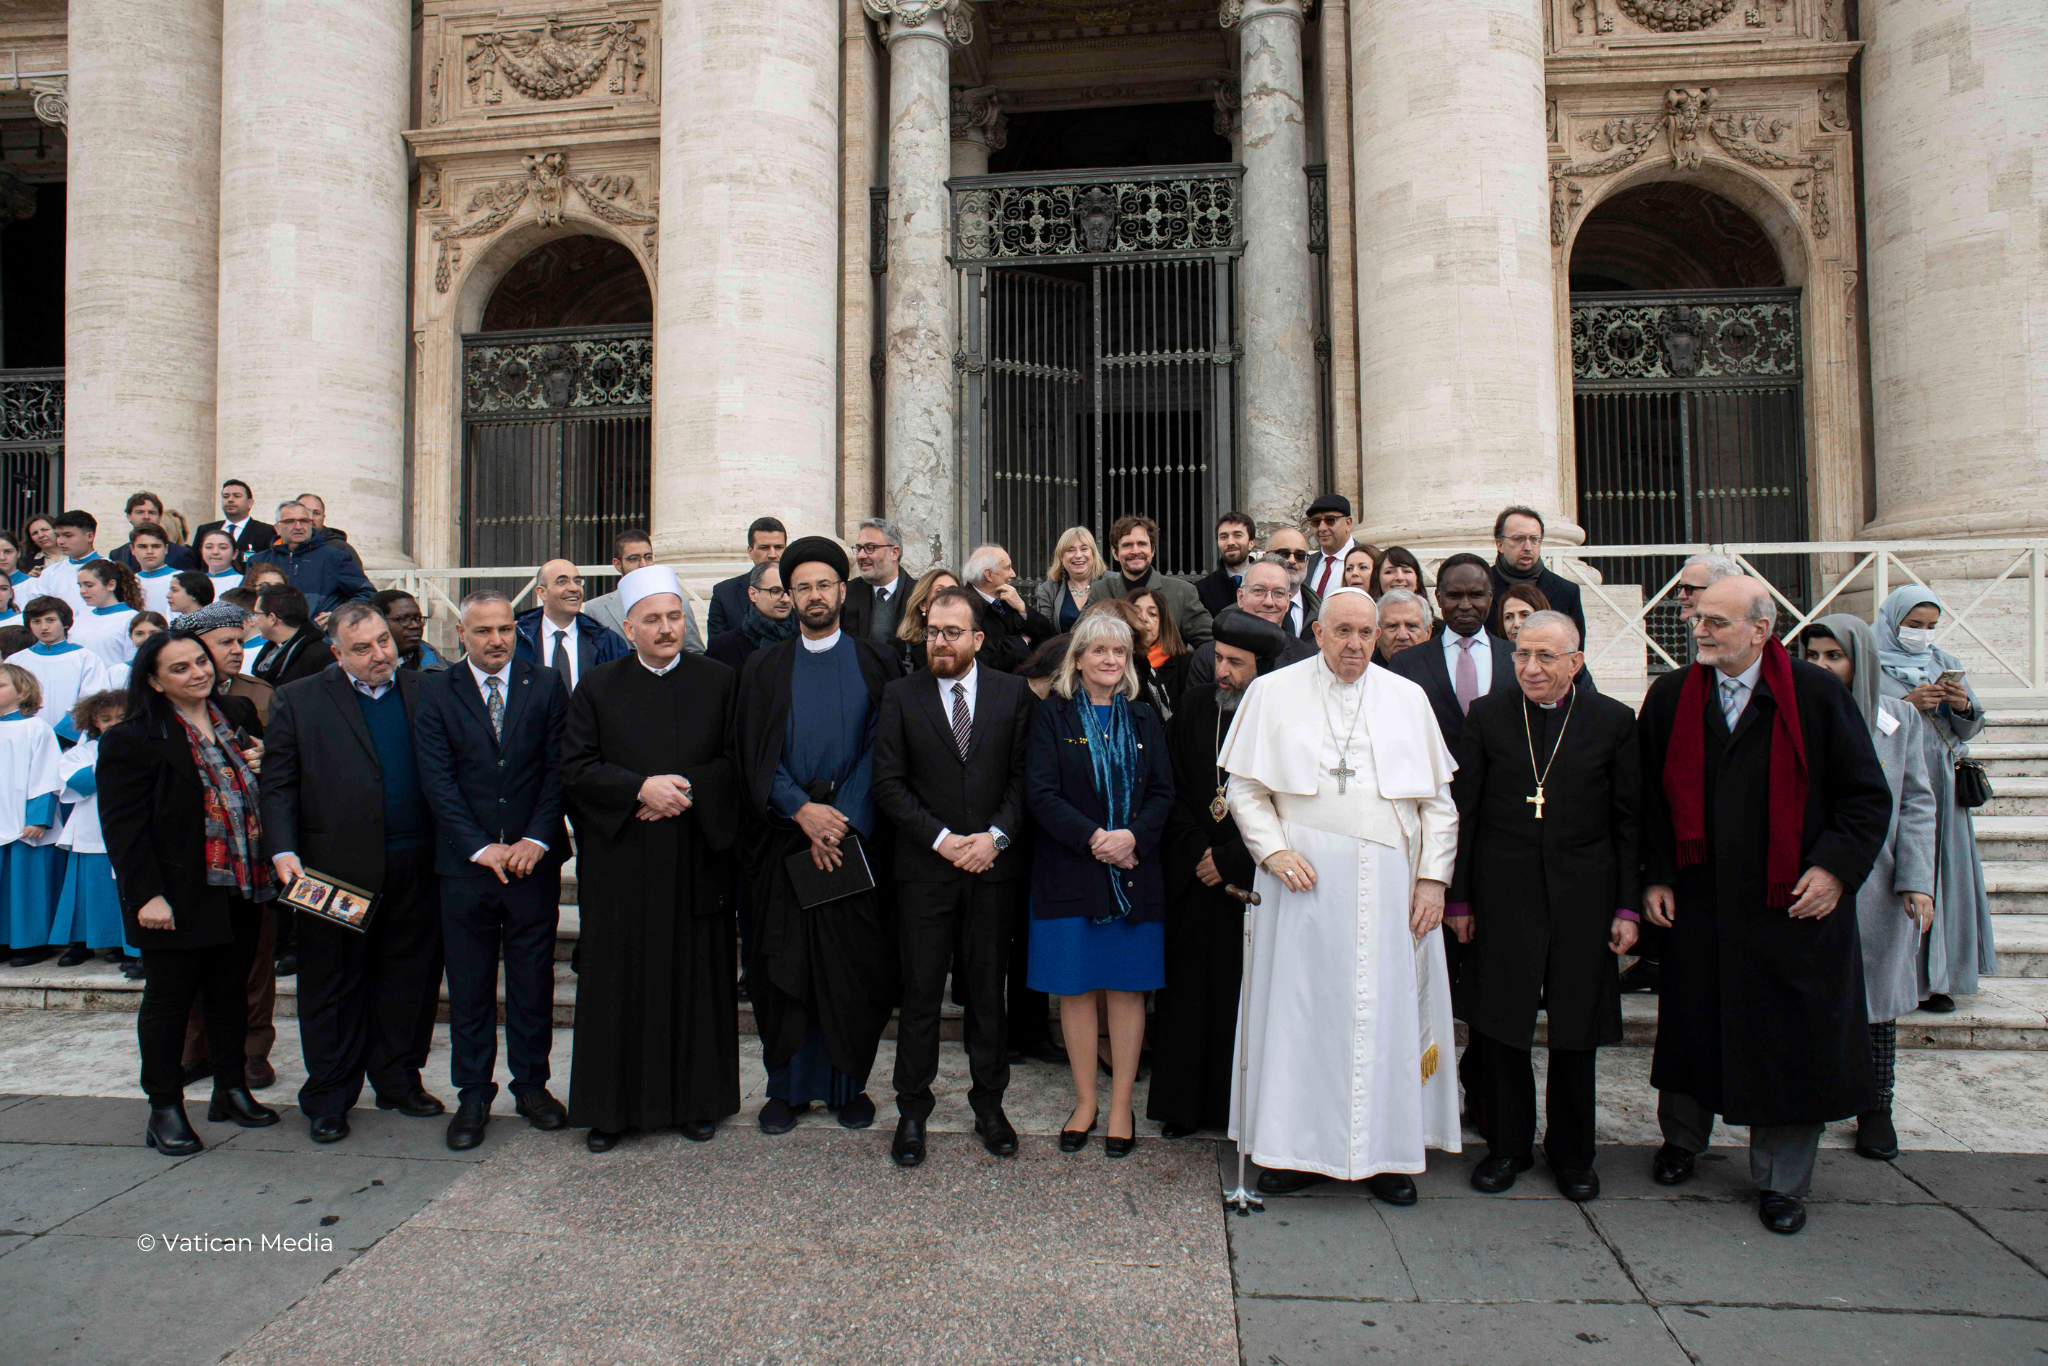 Pope Francis and Wilton Park participants at the Vatican.